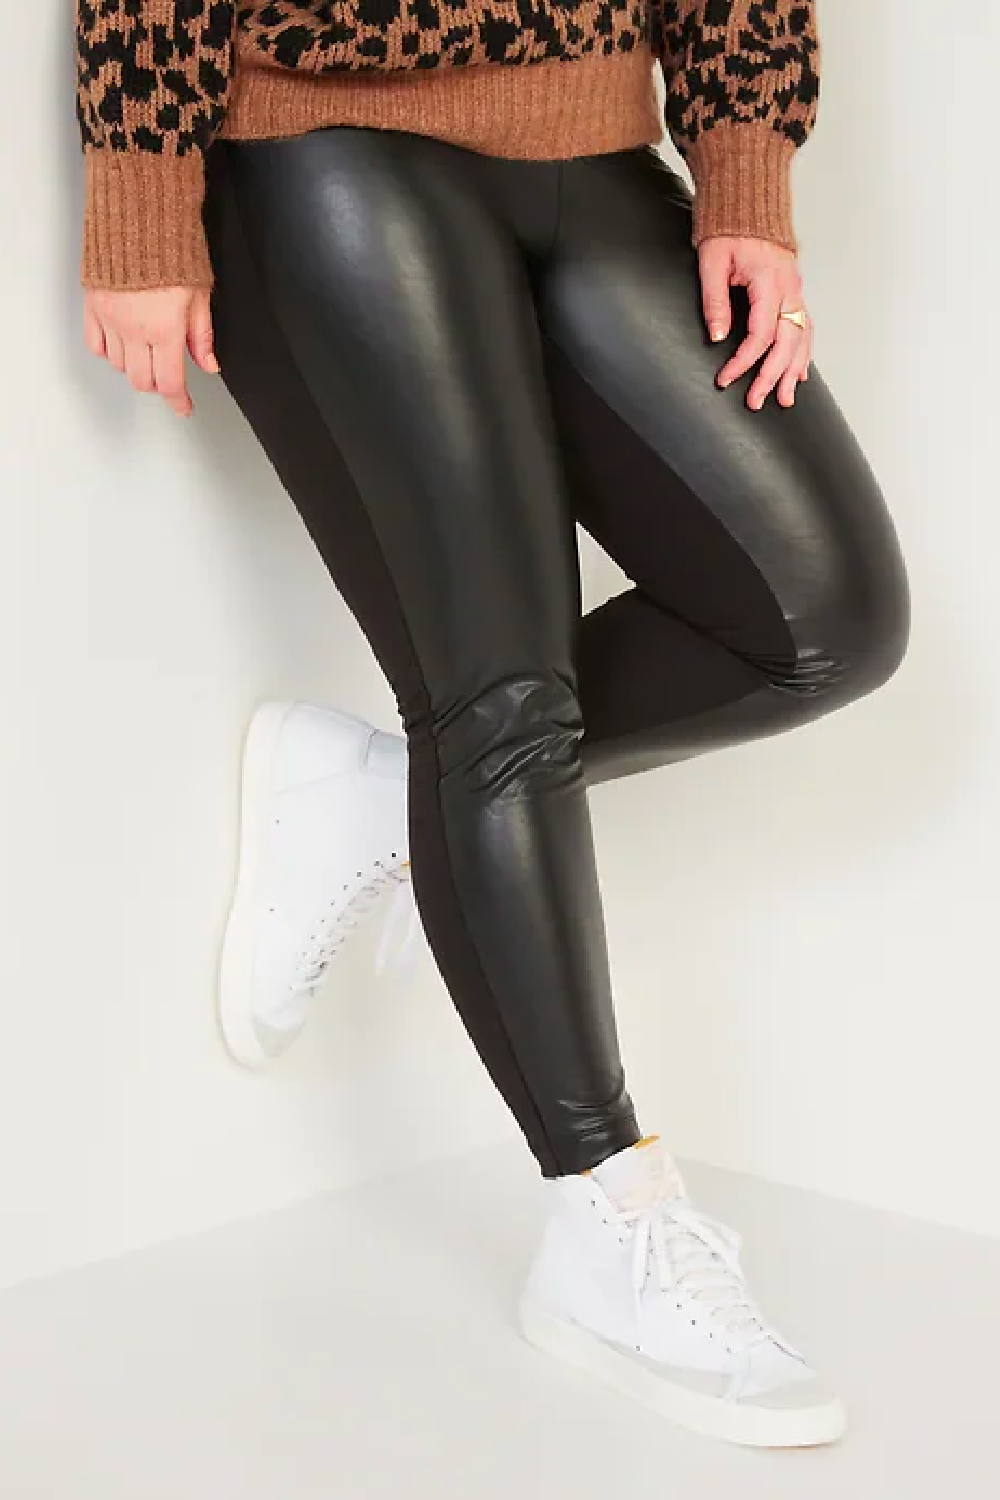 Buy INDJXND Satin Faux Leather Leggings for Women Liquid Sexy Trousers  (Black, XL fit Waist 29'' - 37''/ Hips 43'') at Amazon.in